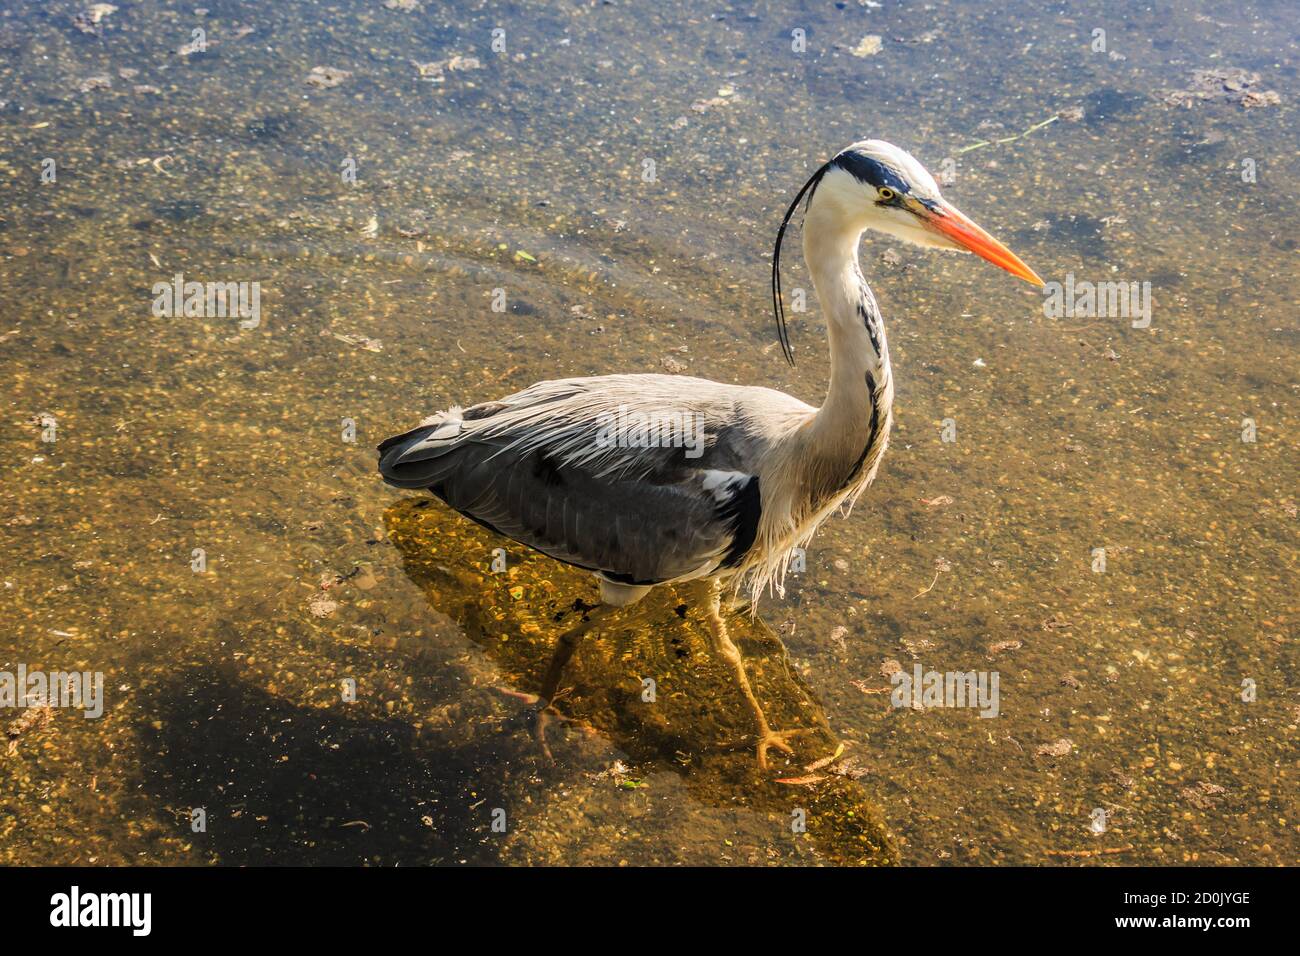 Close up of a Heron bird wading in shallow water on a sunny day.  Herons are freshwater and coastal birds in the family Ardeidae. Ardea Stock Photo